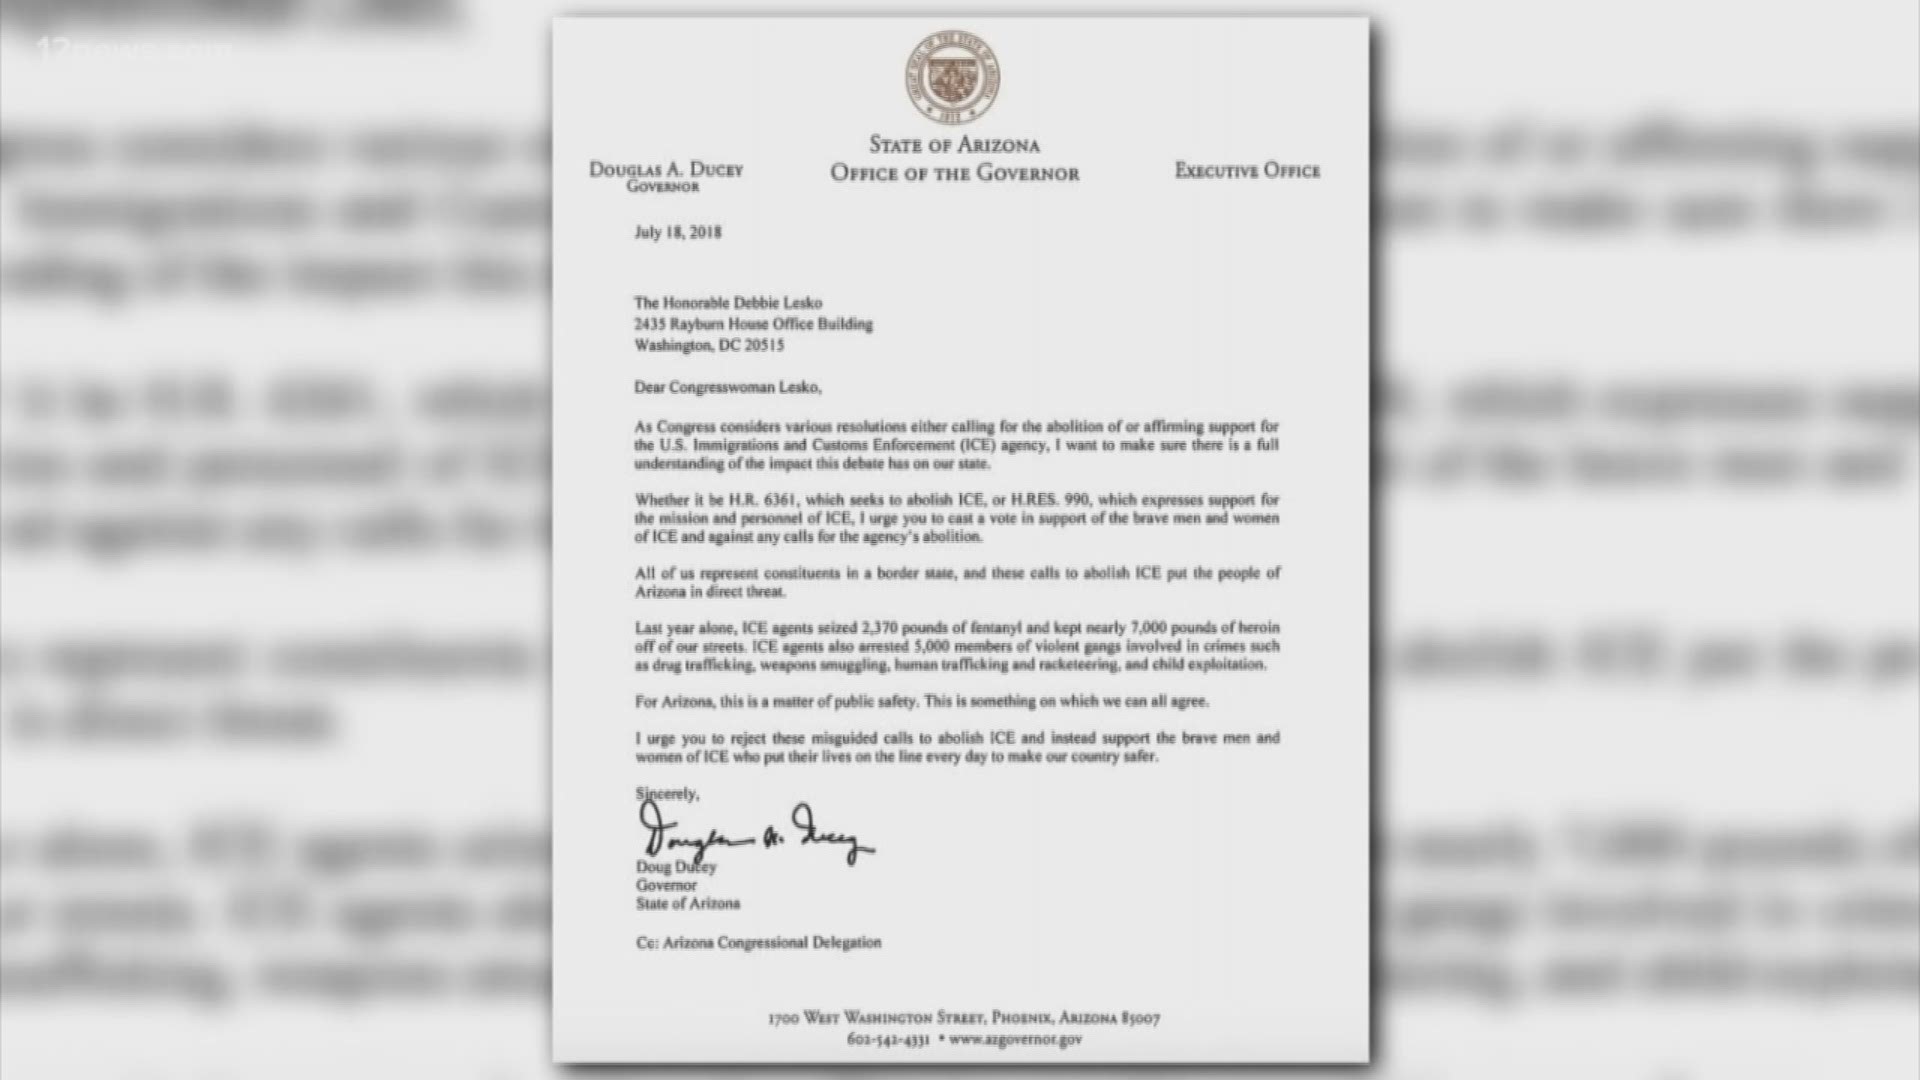 The governor sent a letter Congresswoman Debbie Lesko saying abolishing ICE is a "direct threat" to Arizona.